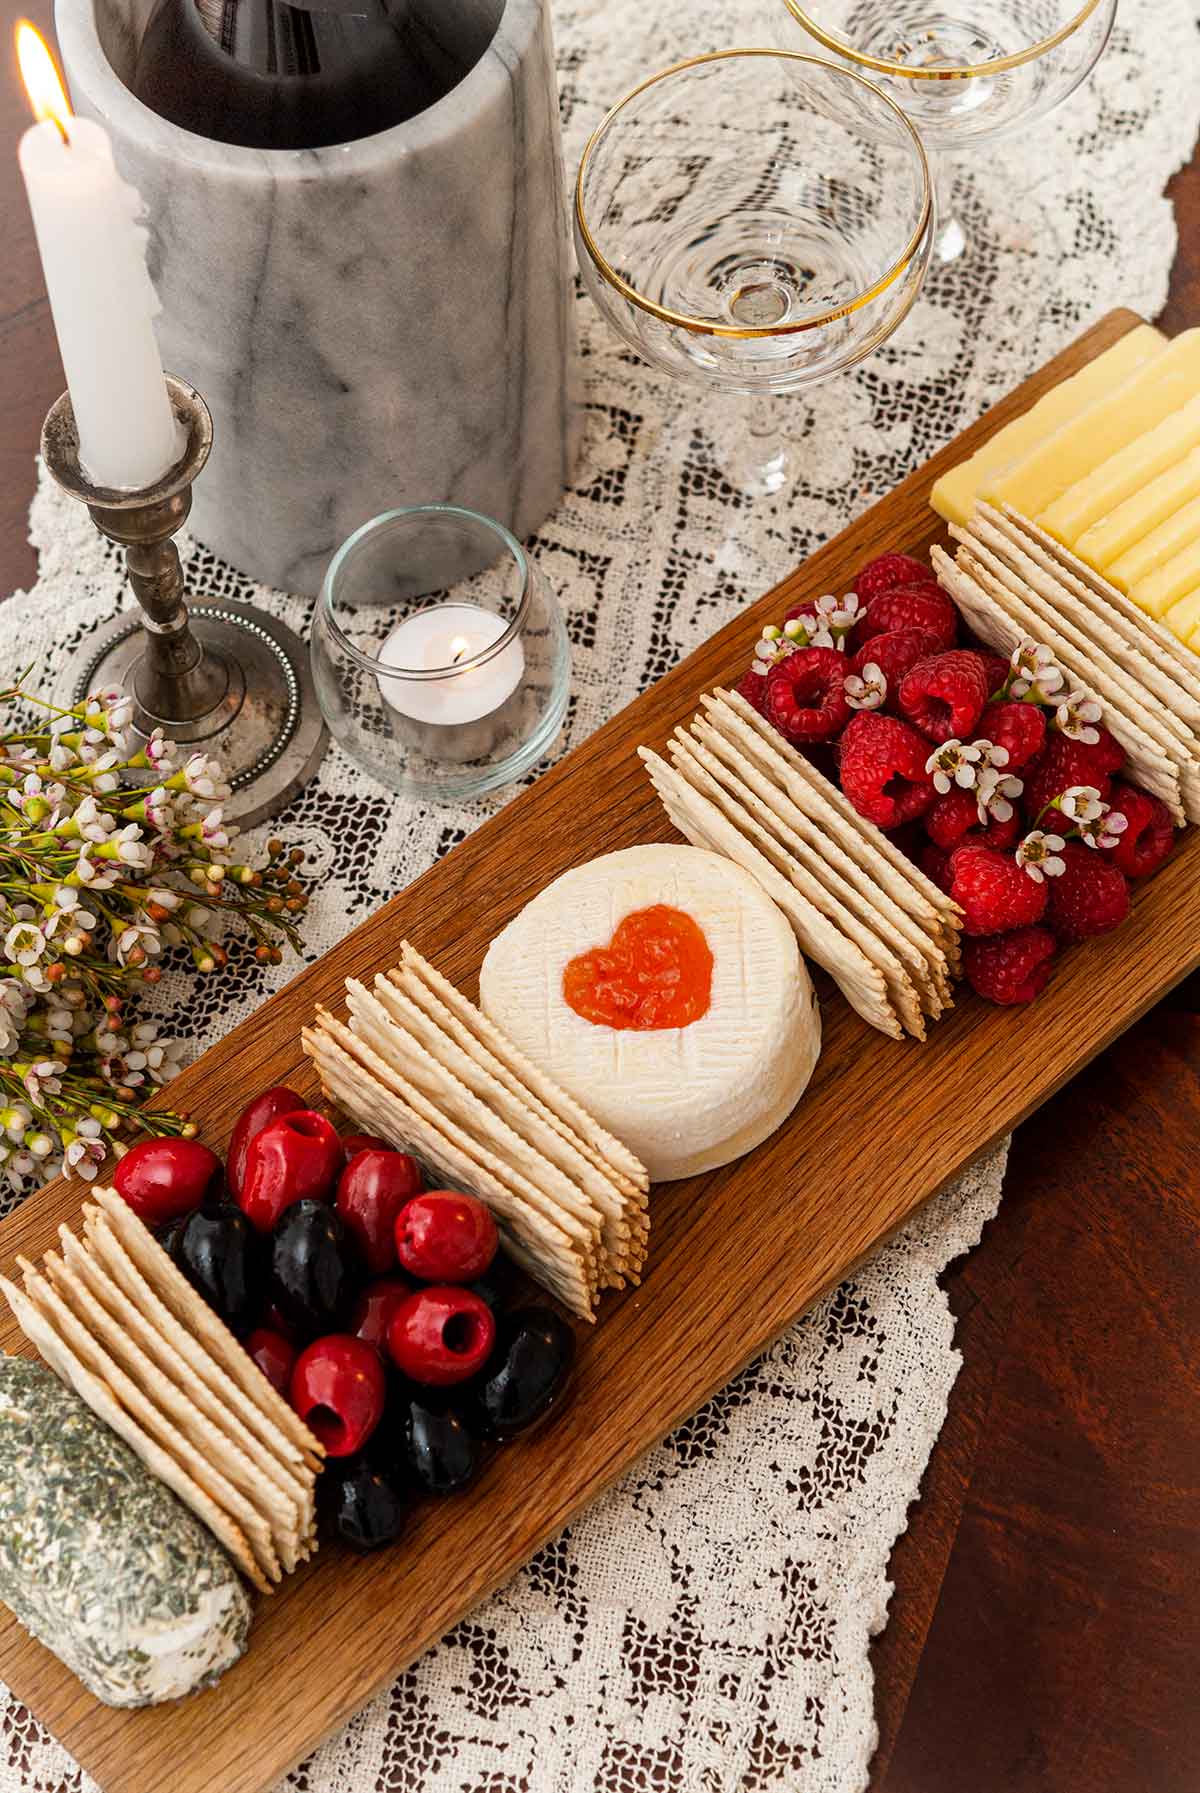 A cheese board with 3 cheeses, crackers, olives and raspberries on a lace tablecloth.